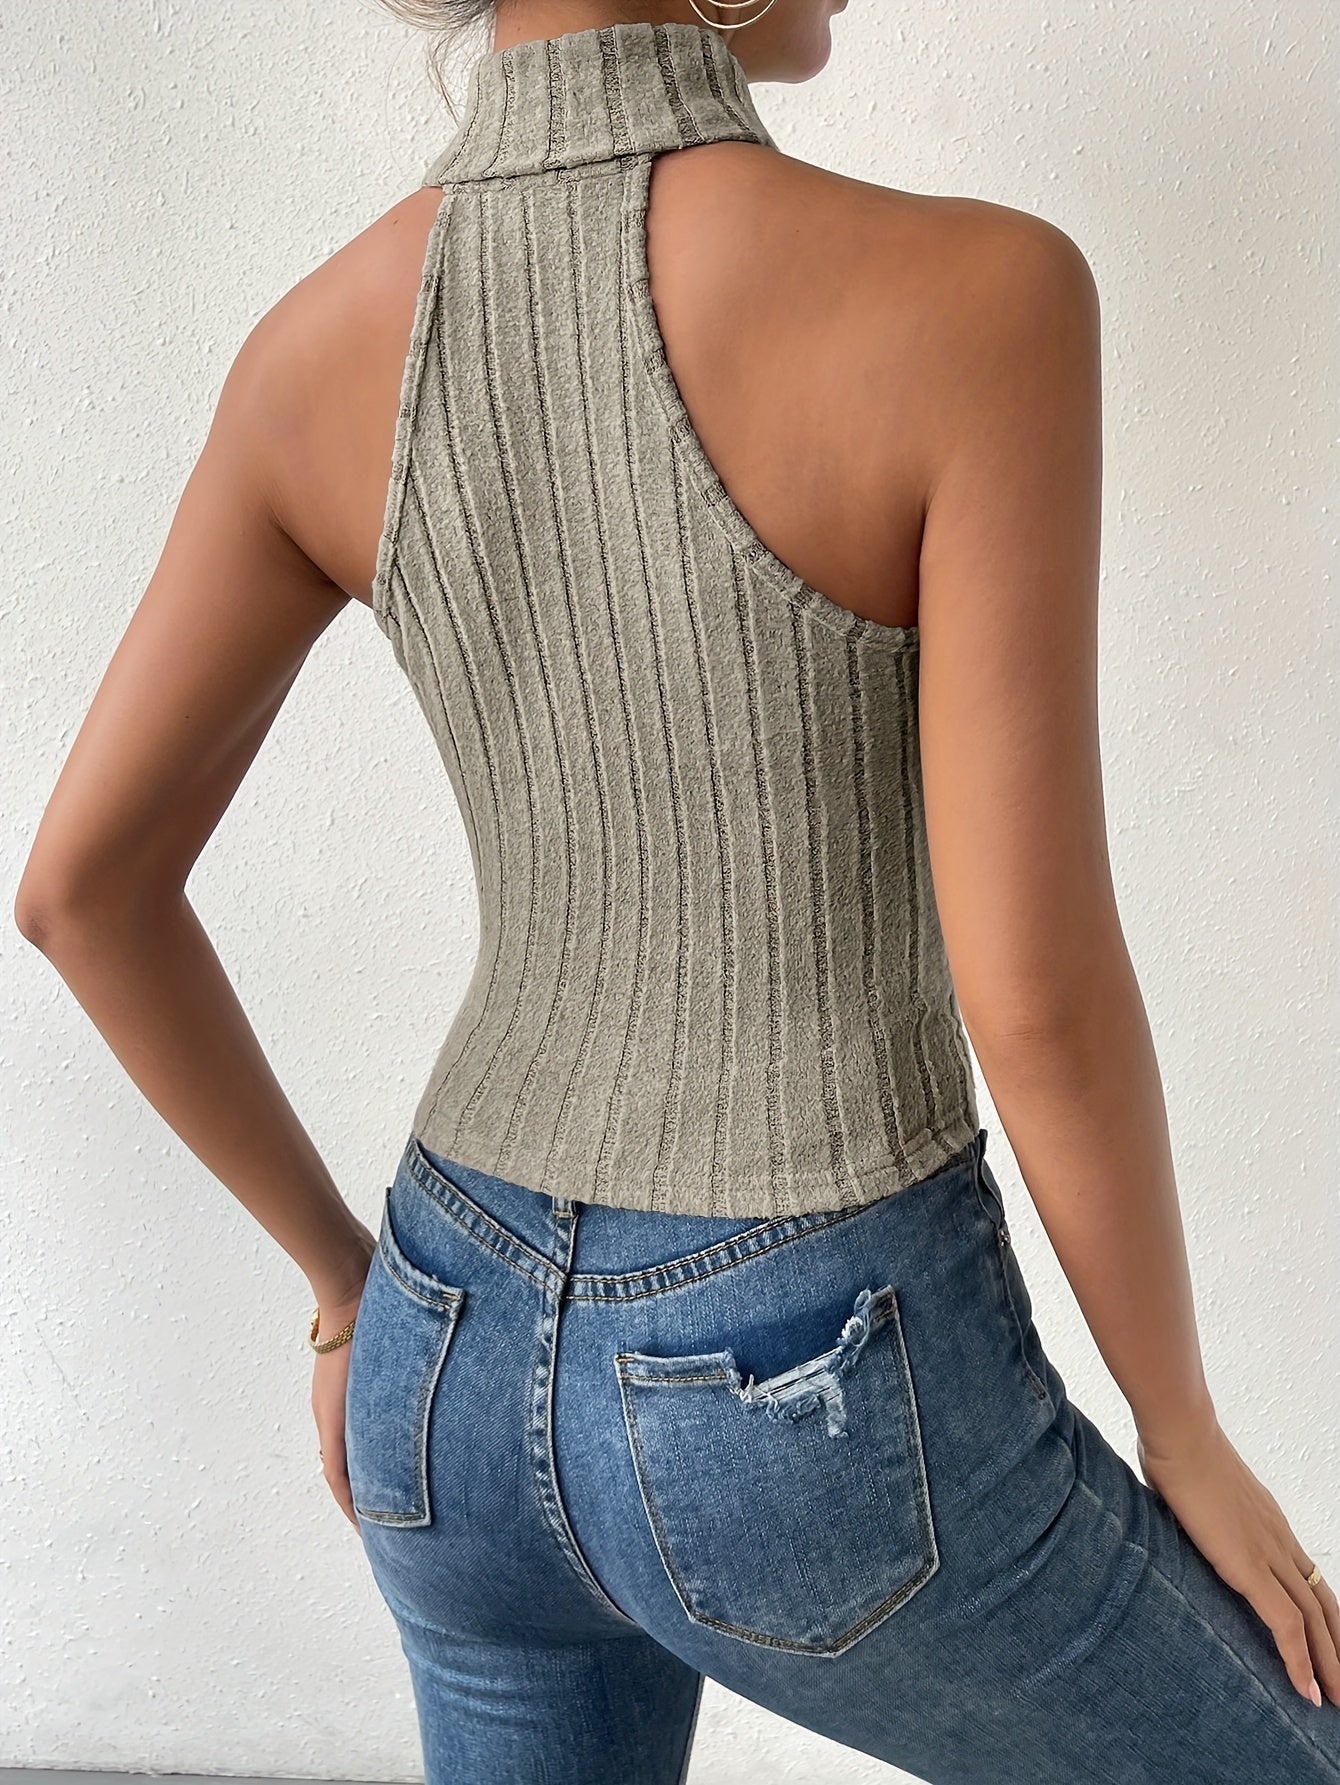 Girlfairy Ribbed Turtleneck Tank Top, Casual Solid Sleeveless Top, Women's Clothing